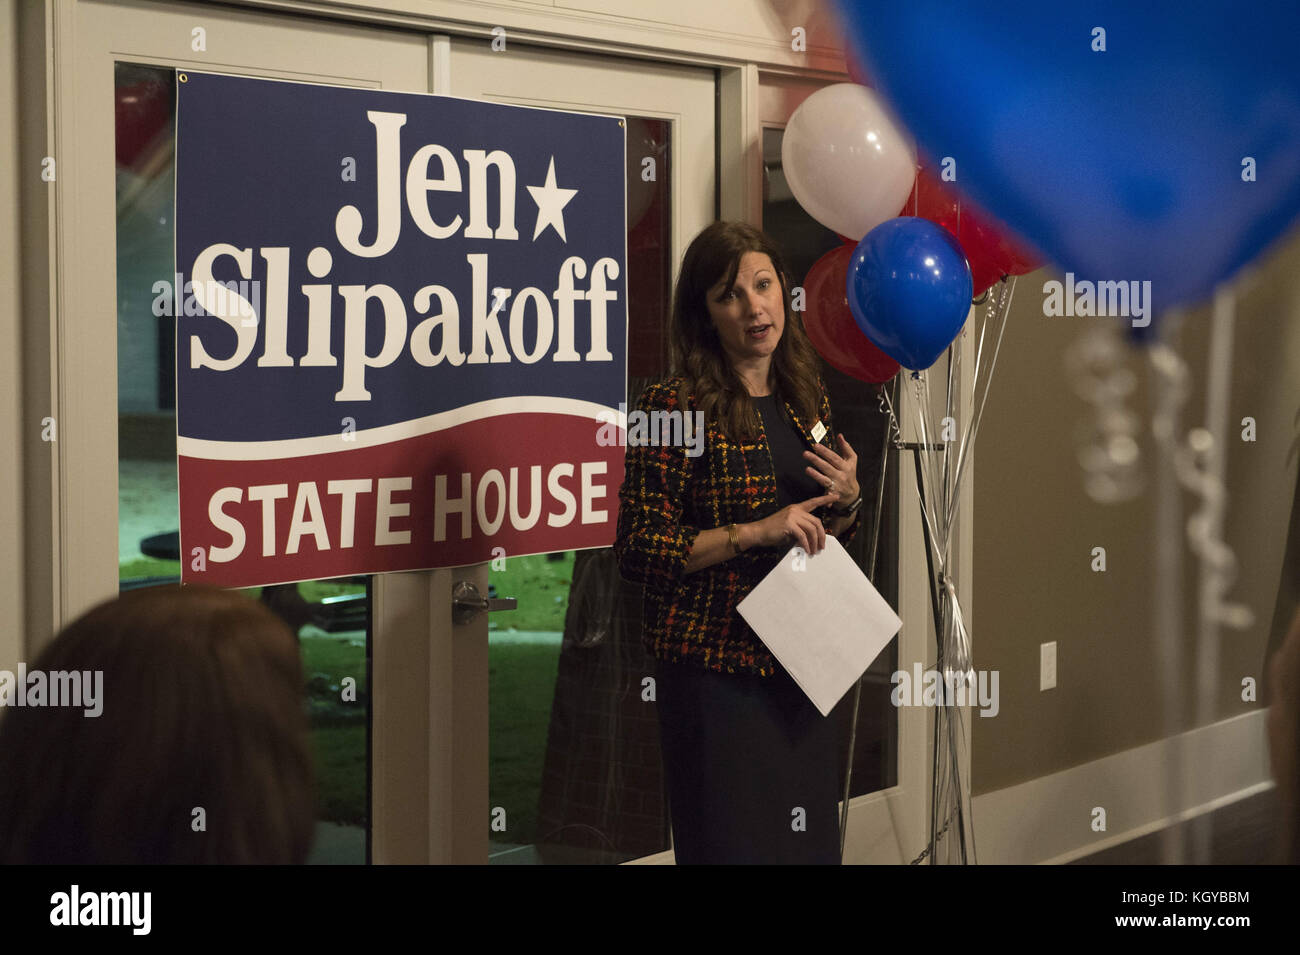 November 9, 2017 - GA - Jen Slipakoff, a Kennesaw, Georgia mom with no previous political experience, launched her campaign to run for state representative in the state's 36th house district. She is a vocal ally for human rights, inclusion, and gay and transgender rights, and has a grade school daughter who is transgender. Her district is historically conservative and Republican.''Georgia is one of a few states that does not have anti-discrimination laws in effect, '' she said. ''I am committed to ensuring equality and civil liberties for our LGBTQ neighbors and friends. We cannot allow discri Stock Photo